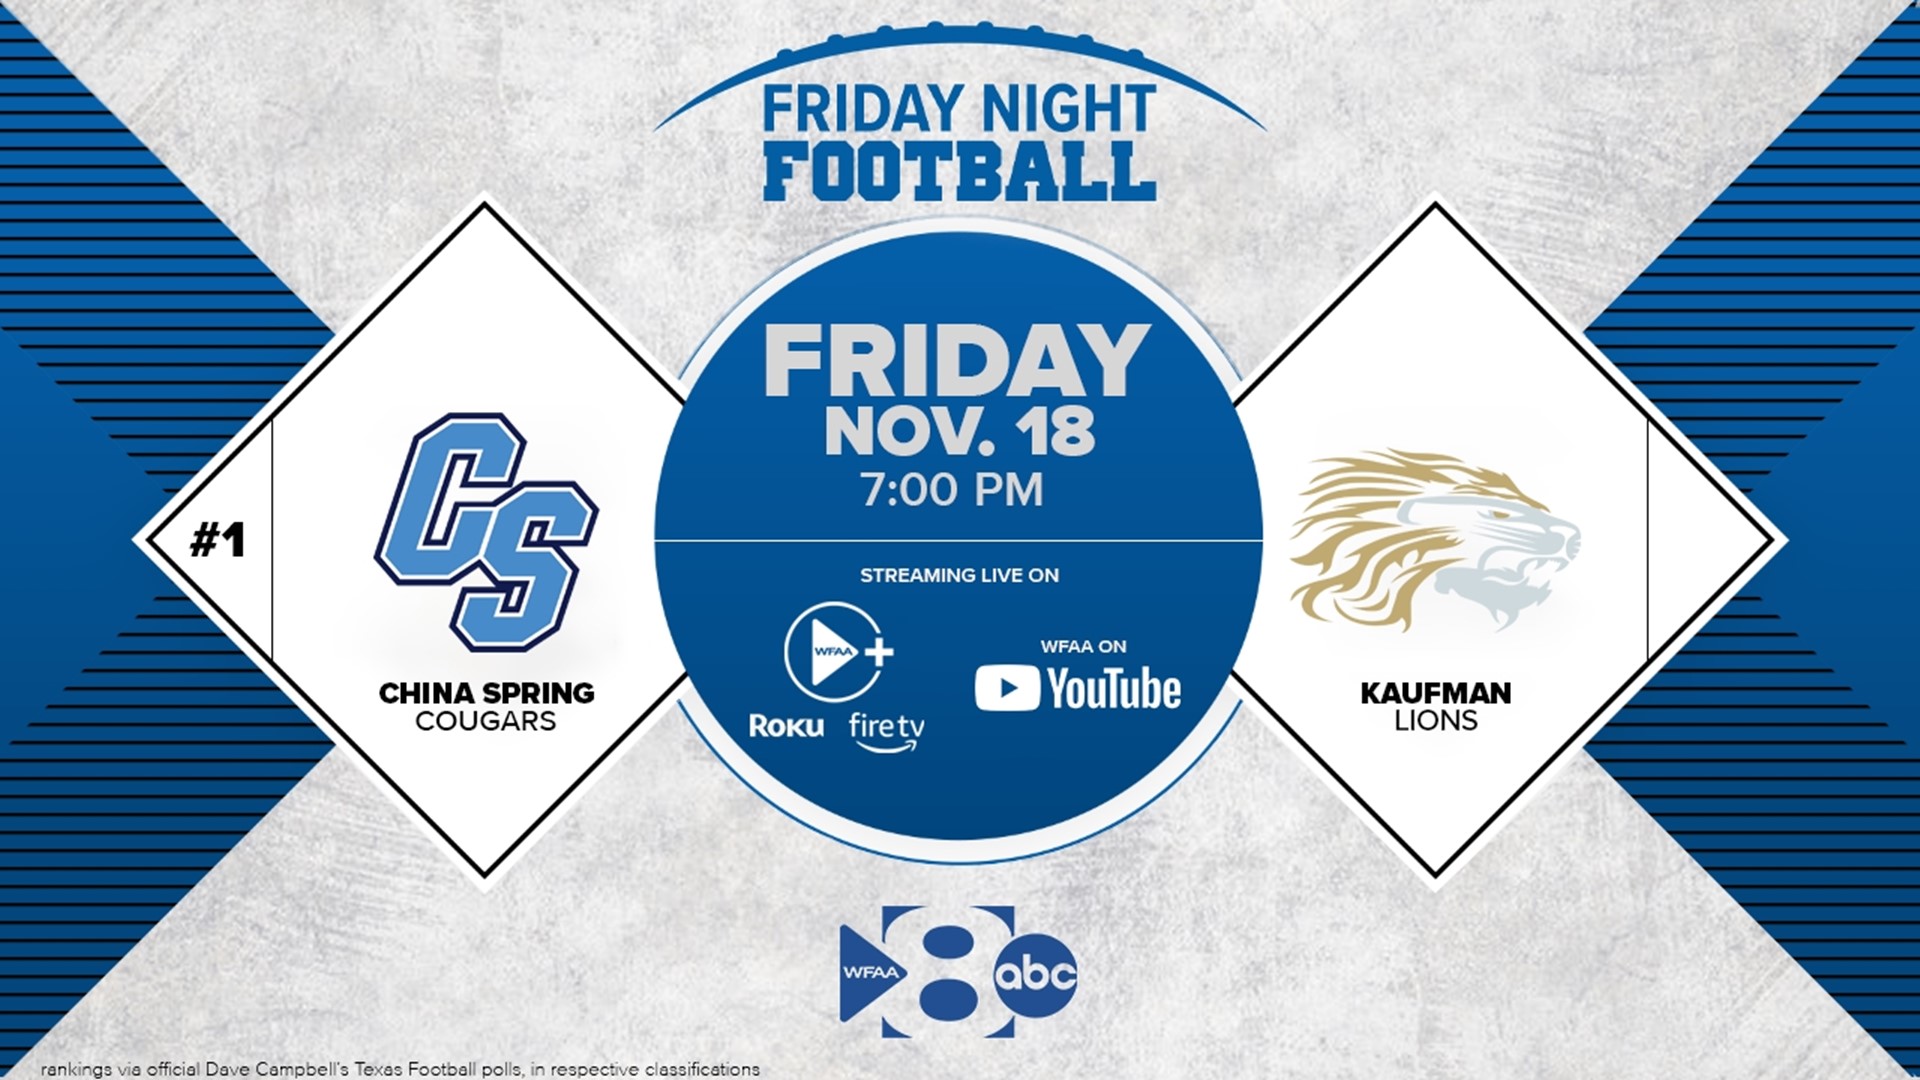 WFAA's Friday Night Football broadcasts the Area Round playoff matchup between the No. 1 China Spring Cougars and the Kaufman Lions.